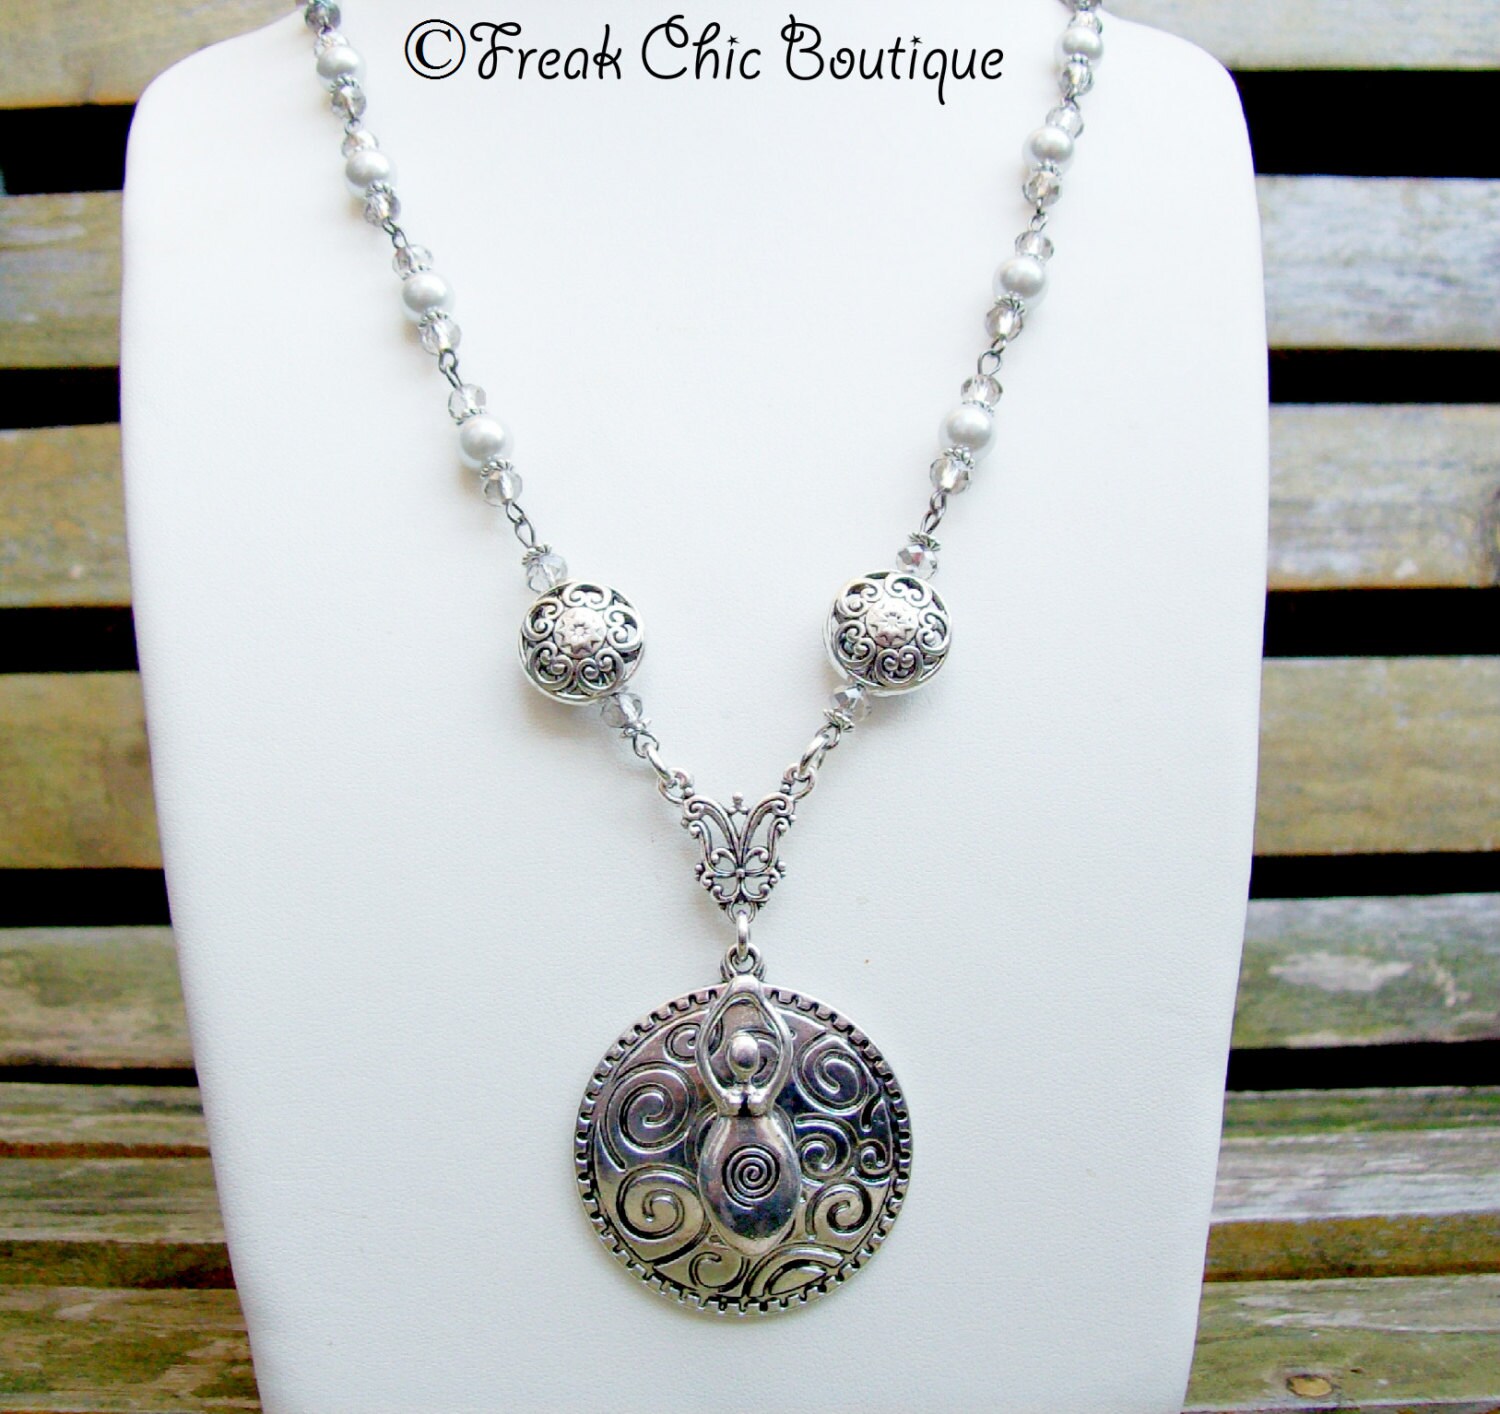 Spiral Goddess necklace Pagan Necklace Wicca Amulet